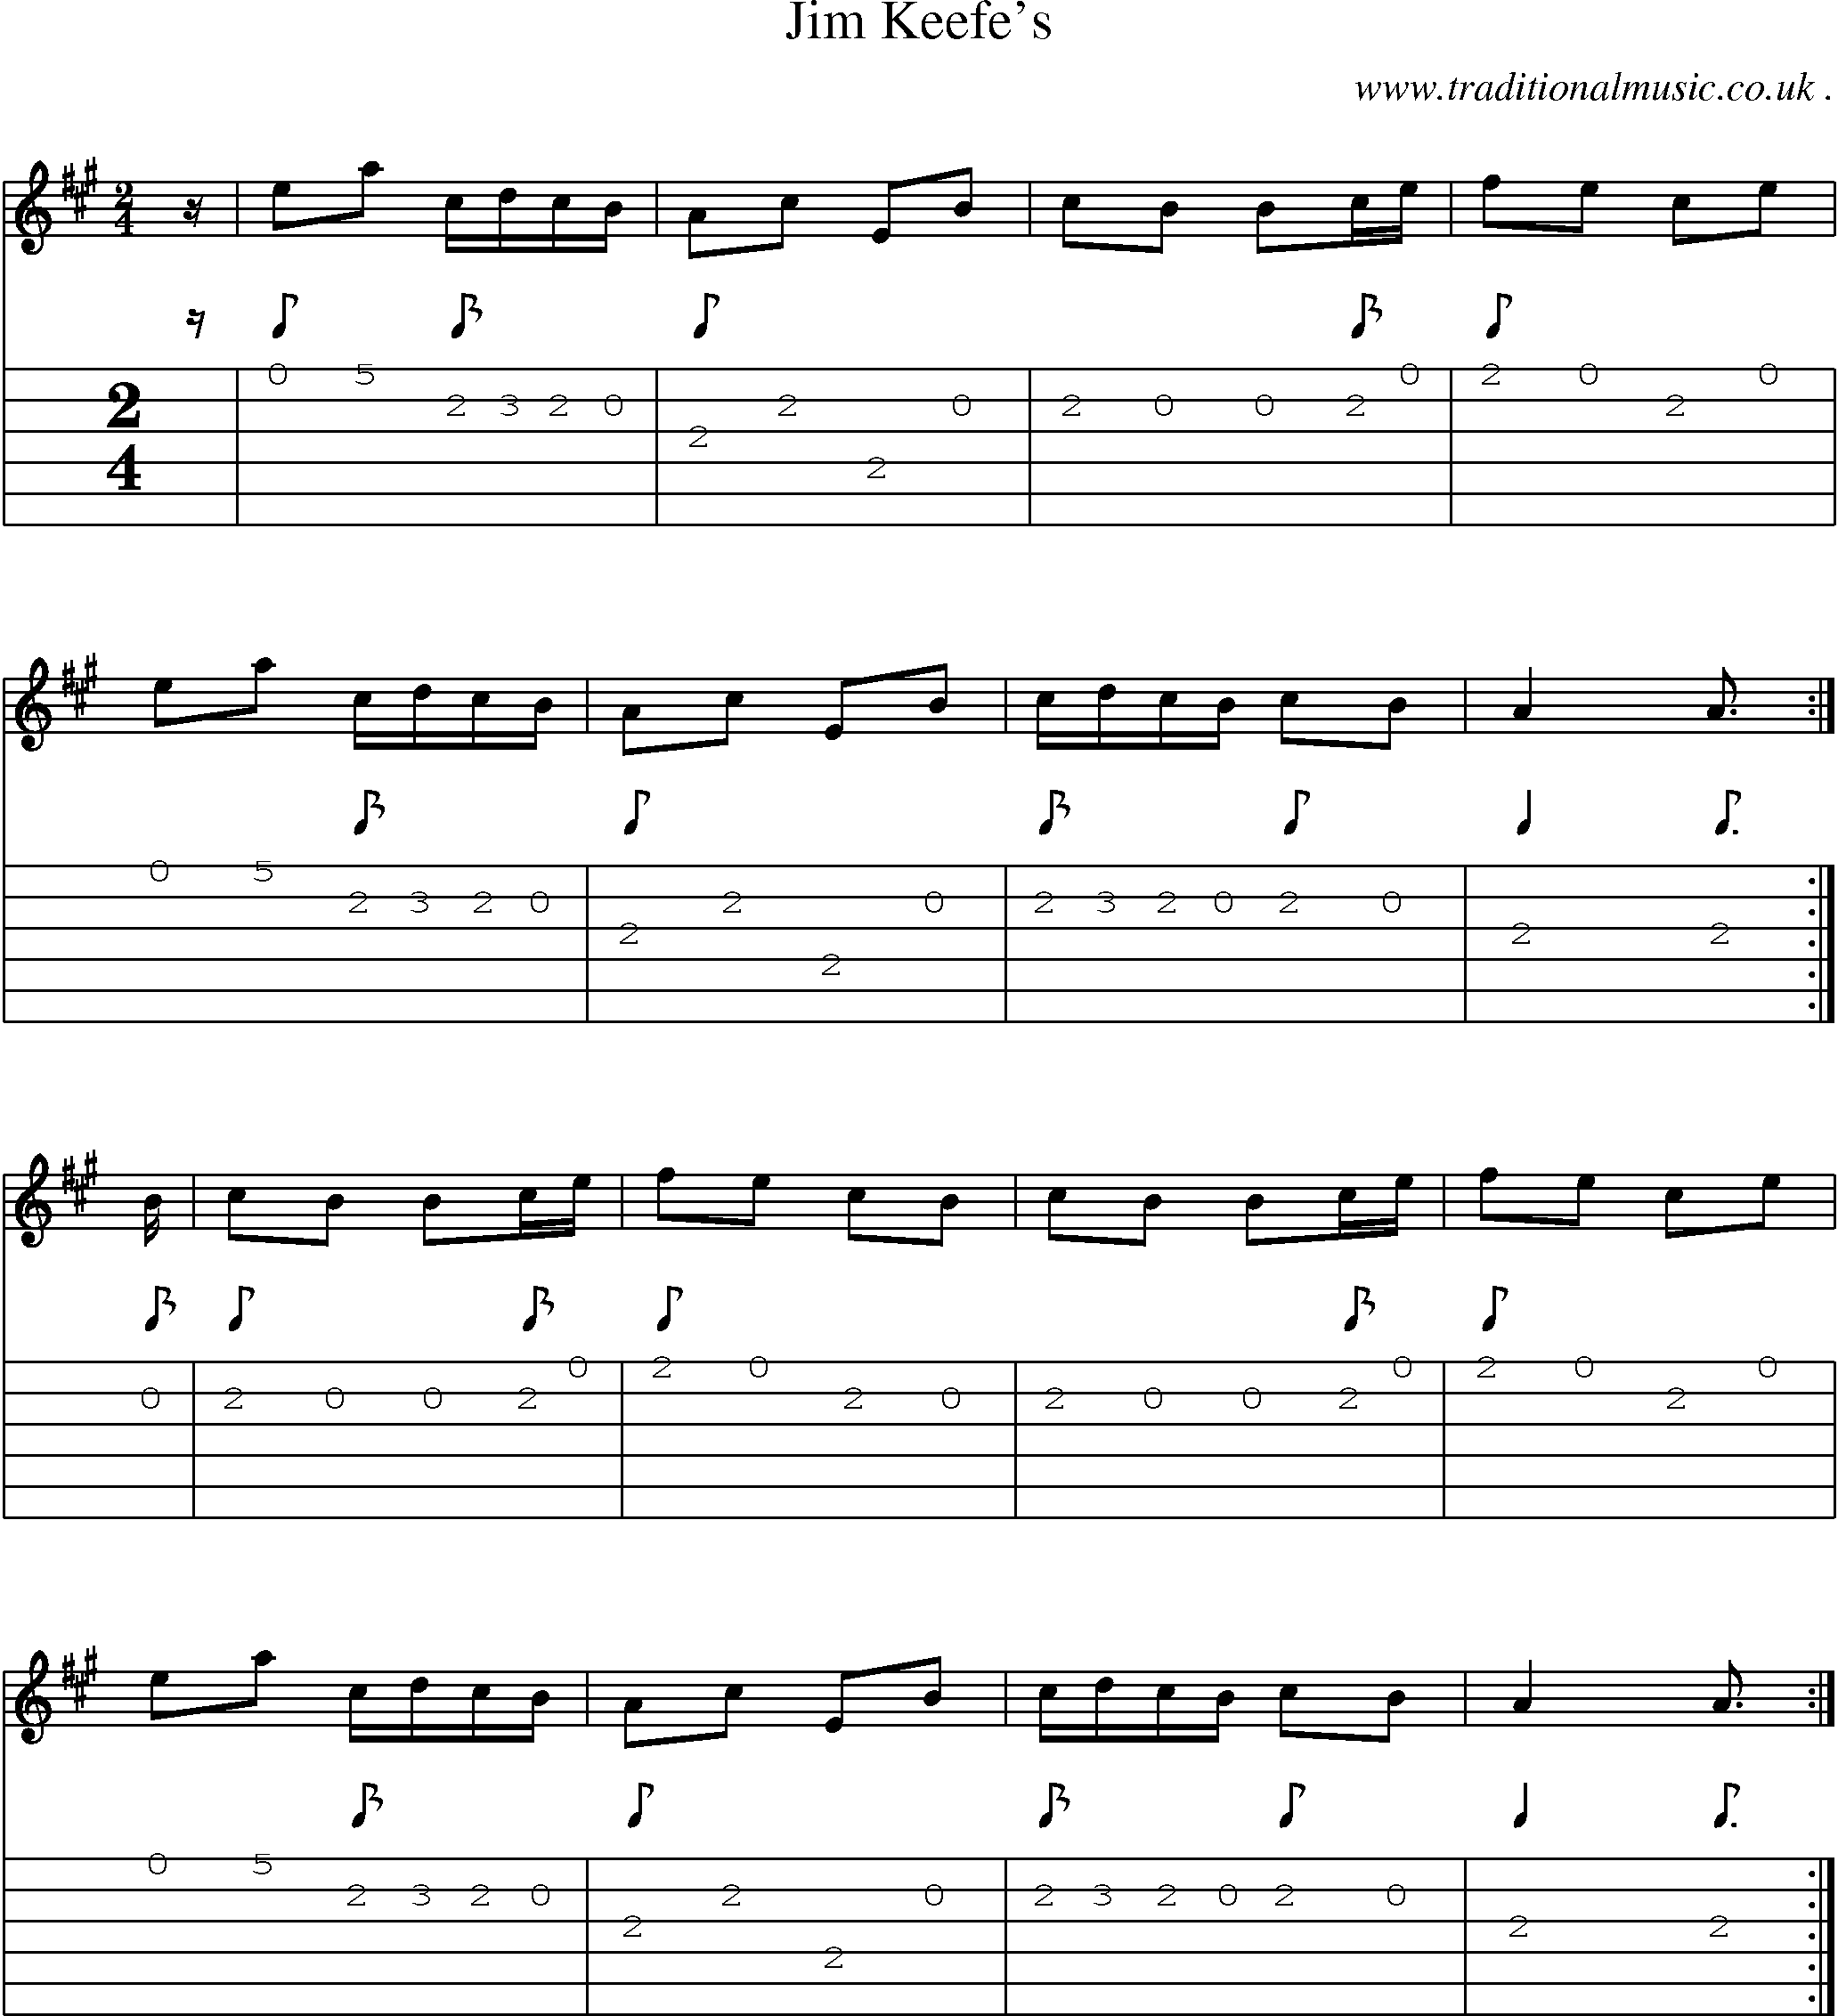 Sheet-Music and Guitar Tabs for Jim Keefes